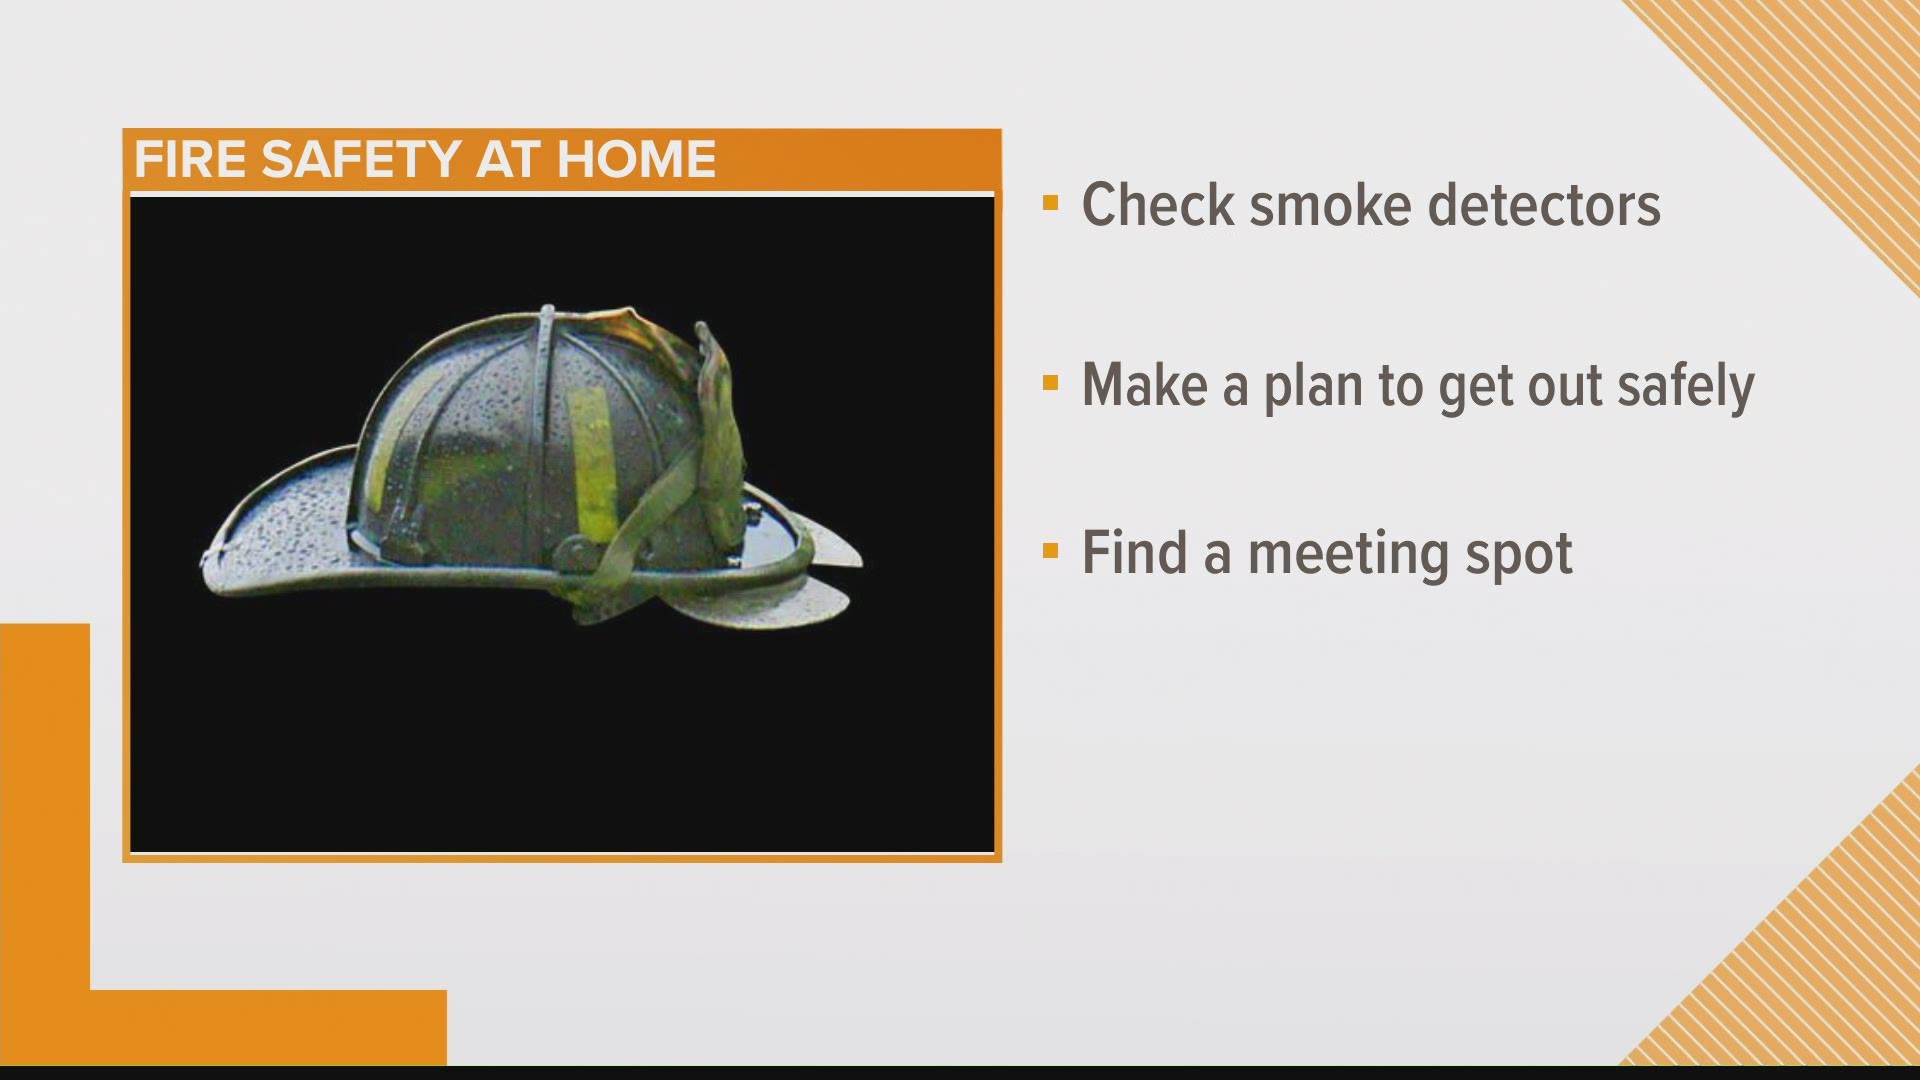 With schools closed and so many people working remotely, fire officials say now is a great time to talk with kids about fire safety in your own home